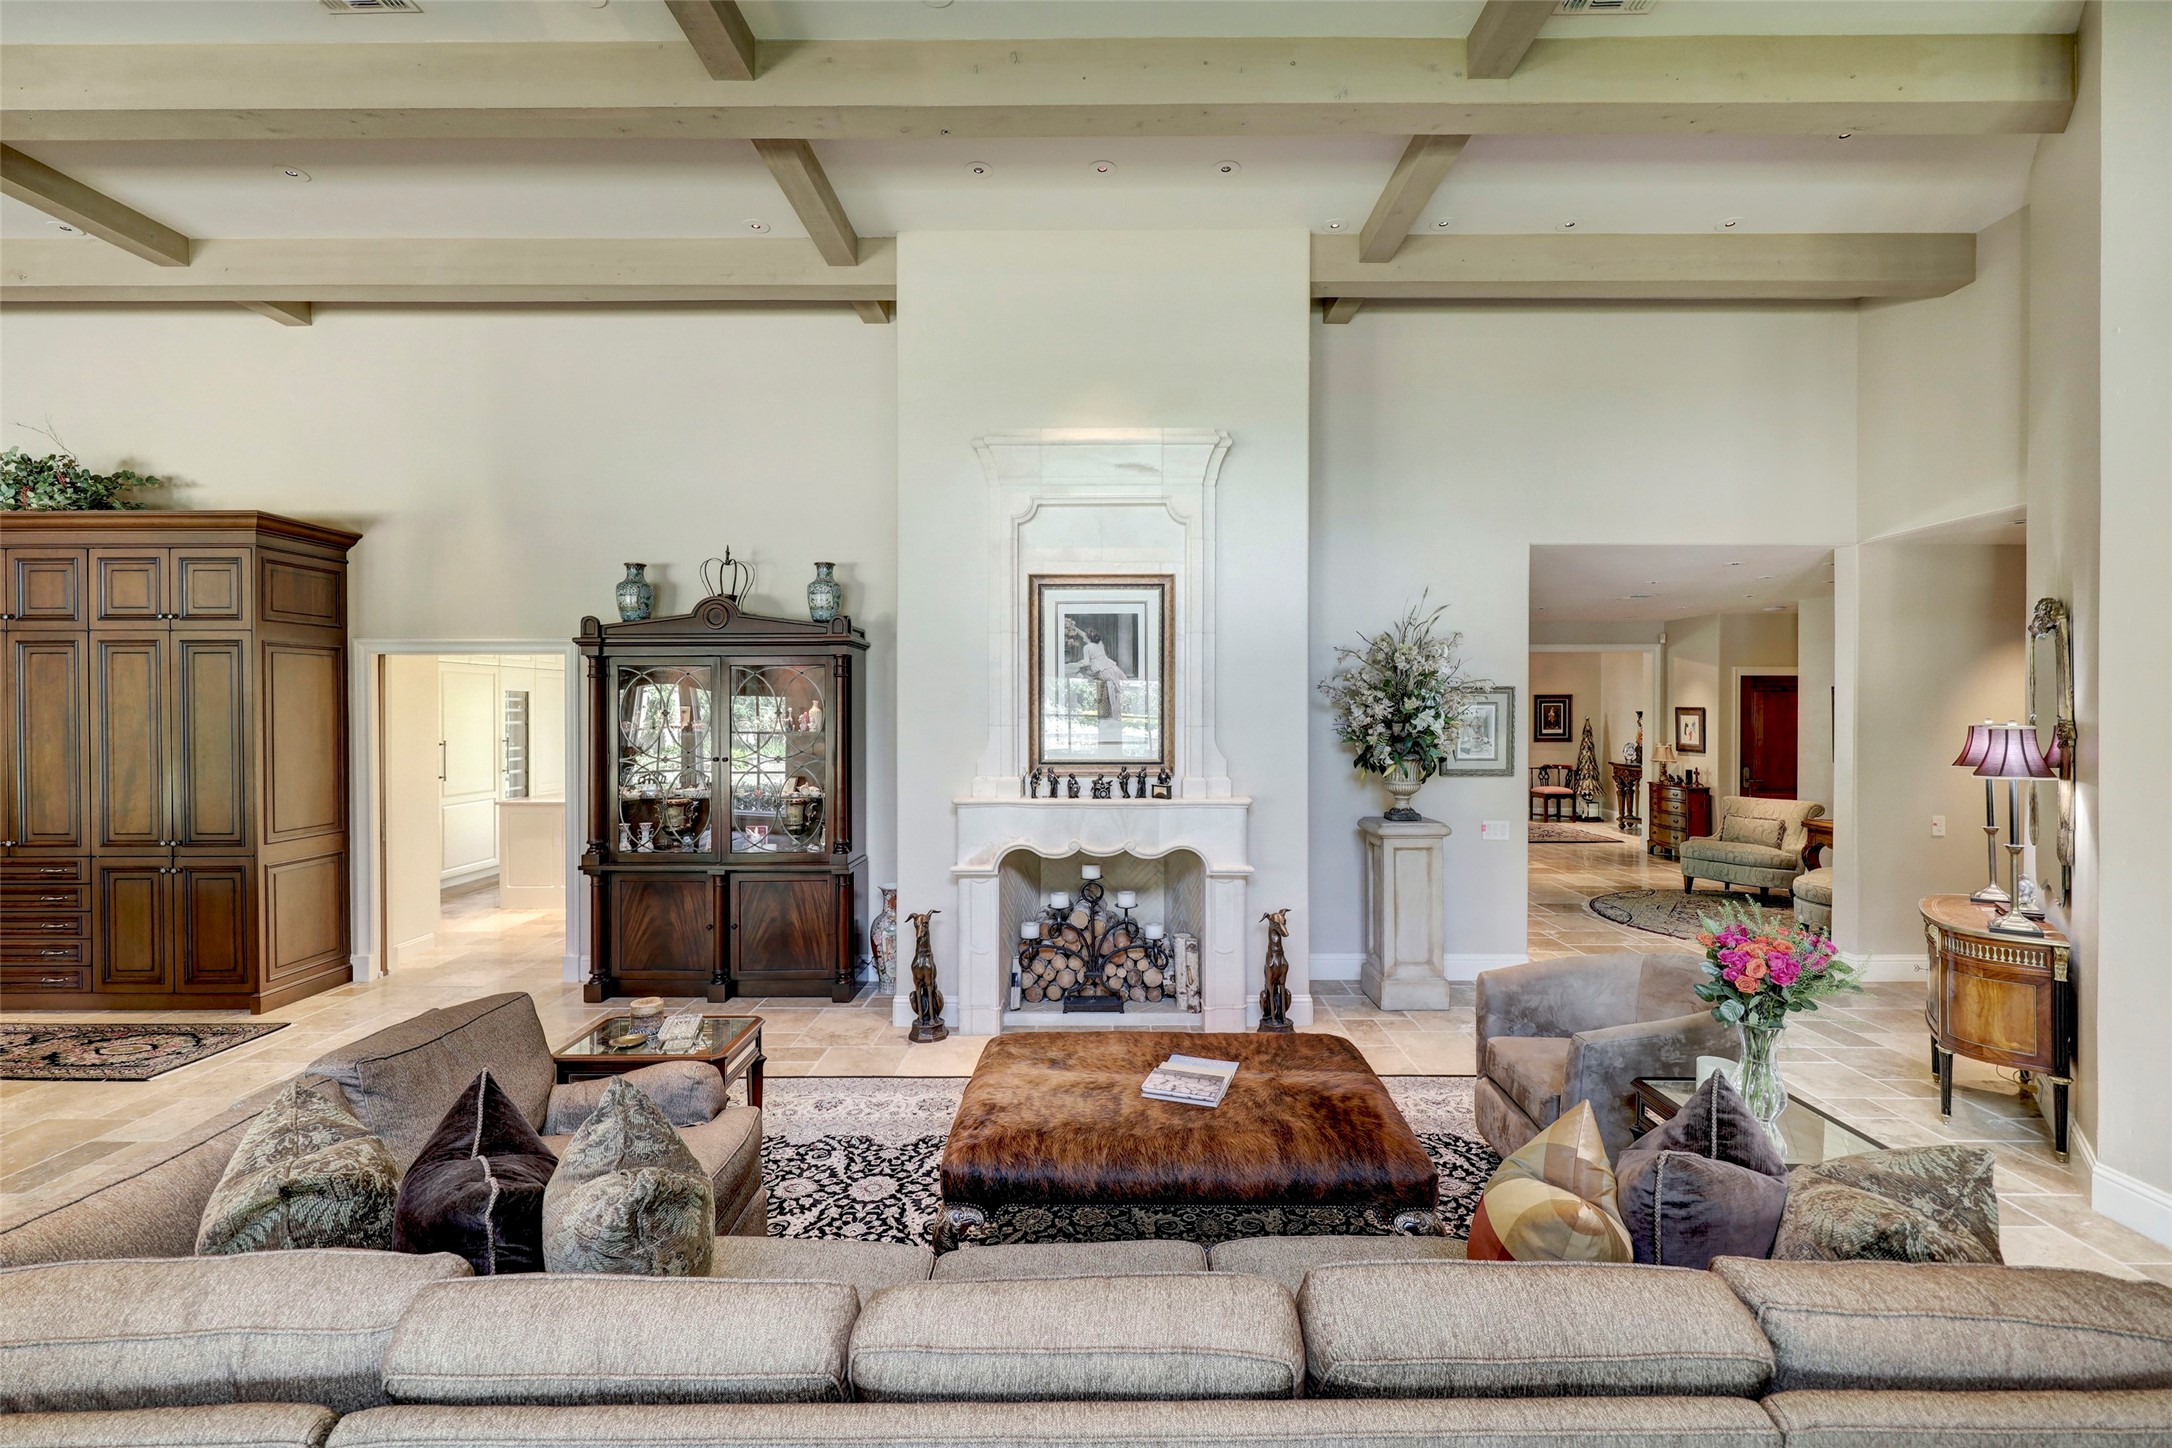 The family room has plenty of room for seating, a stone fireplace and soaring beamed ceiling.